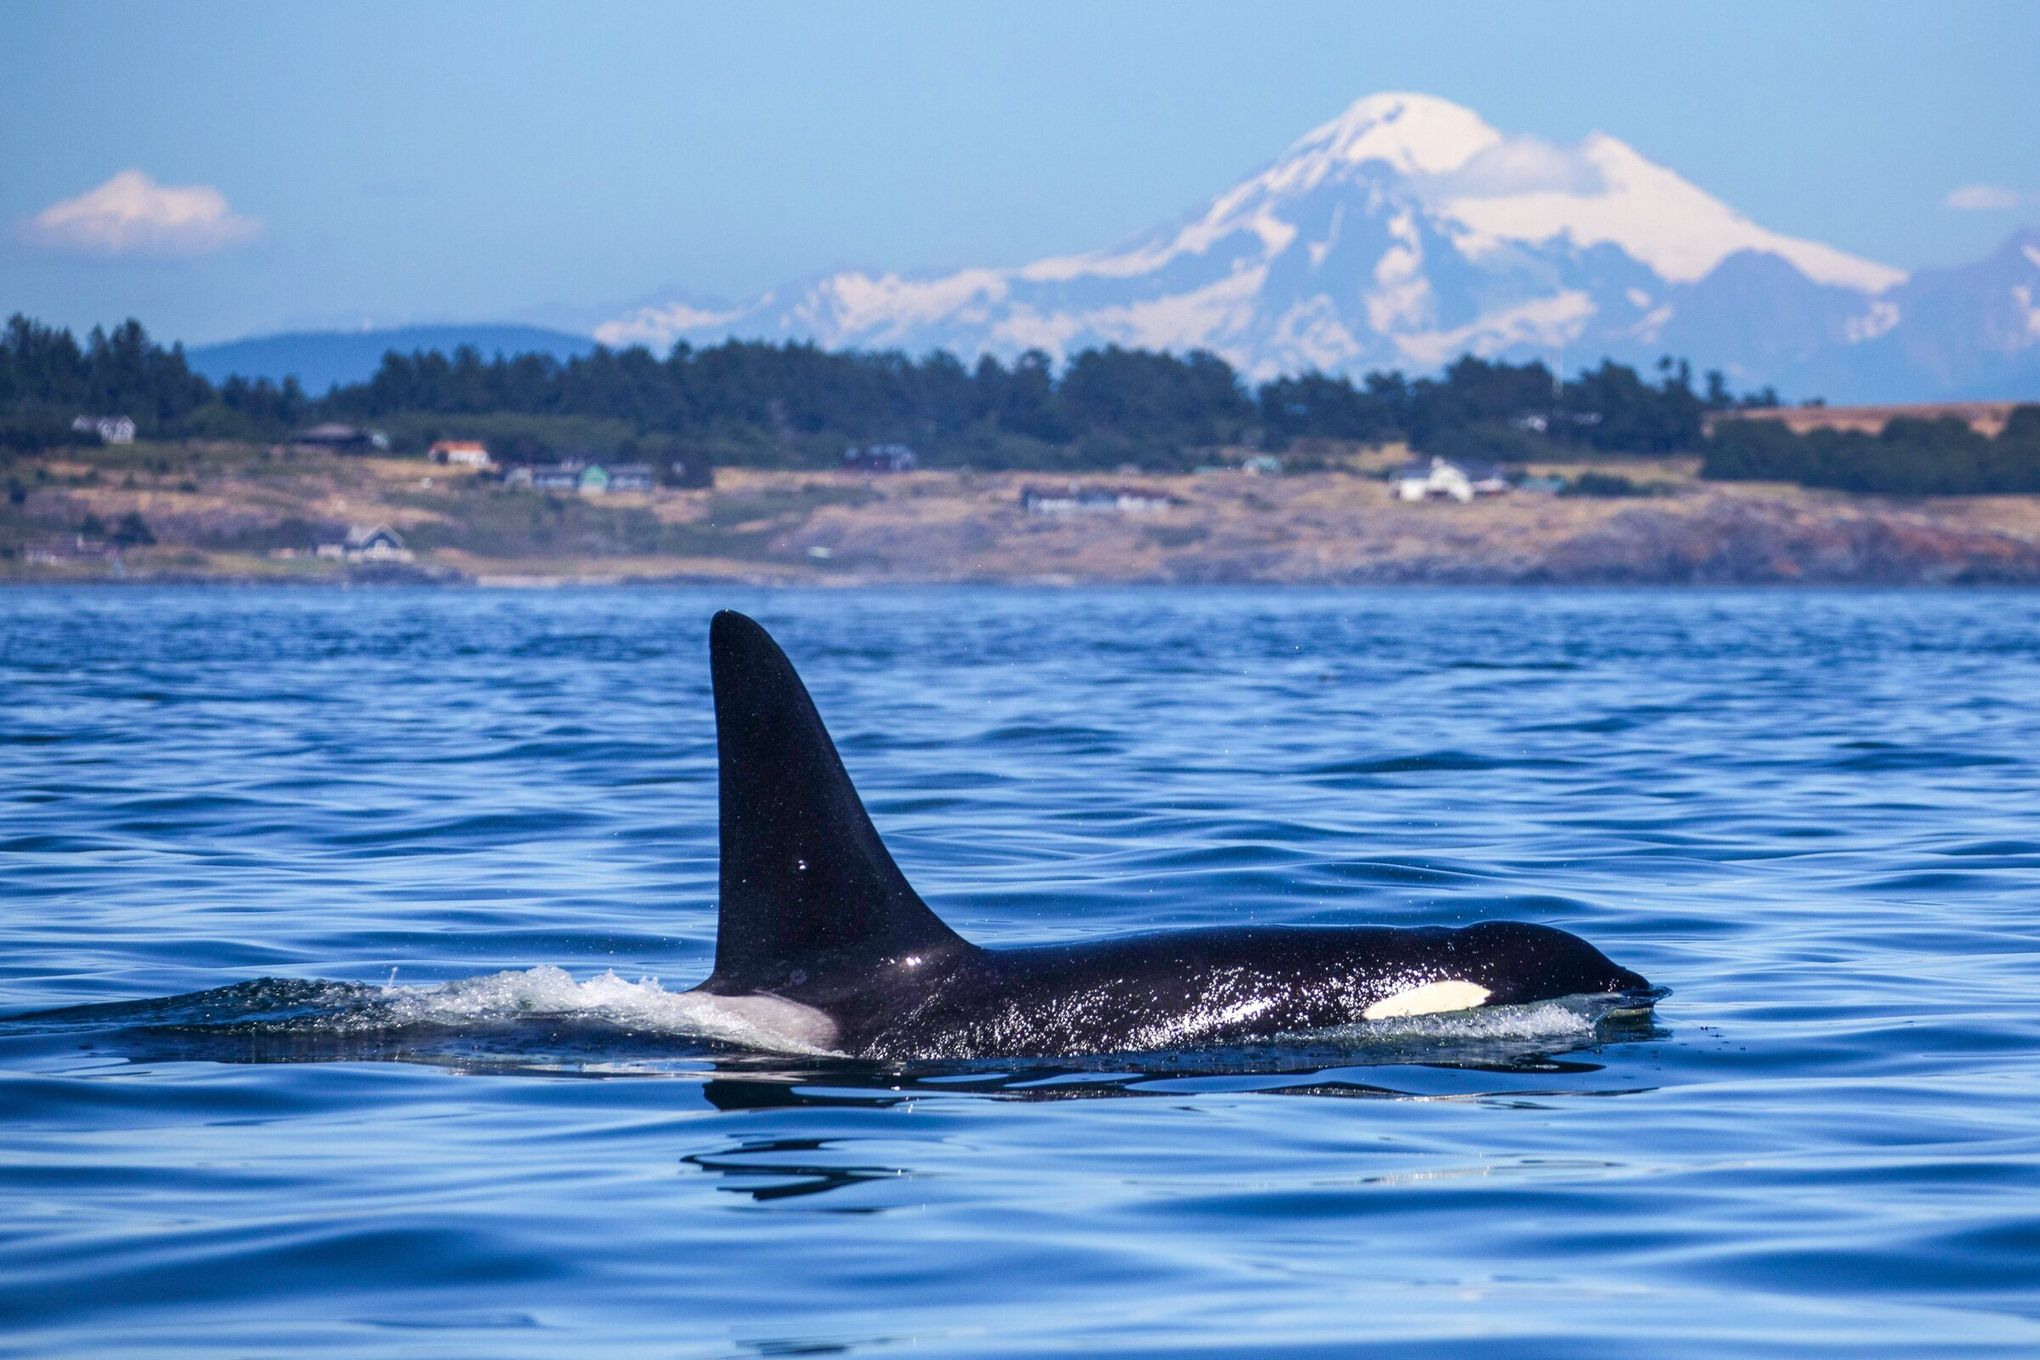 Southern resident orcas are visiting us less often, new study shows